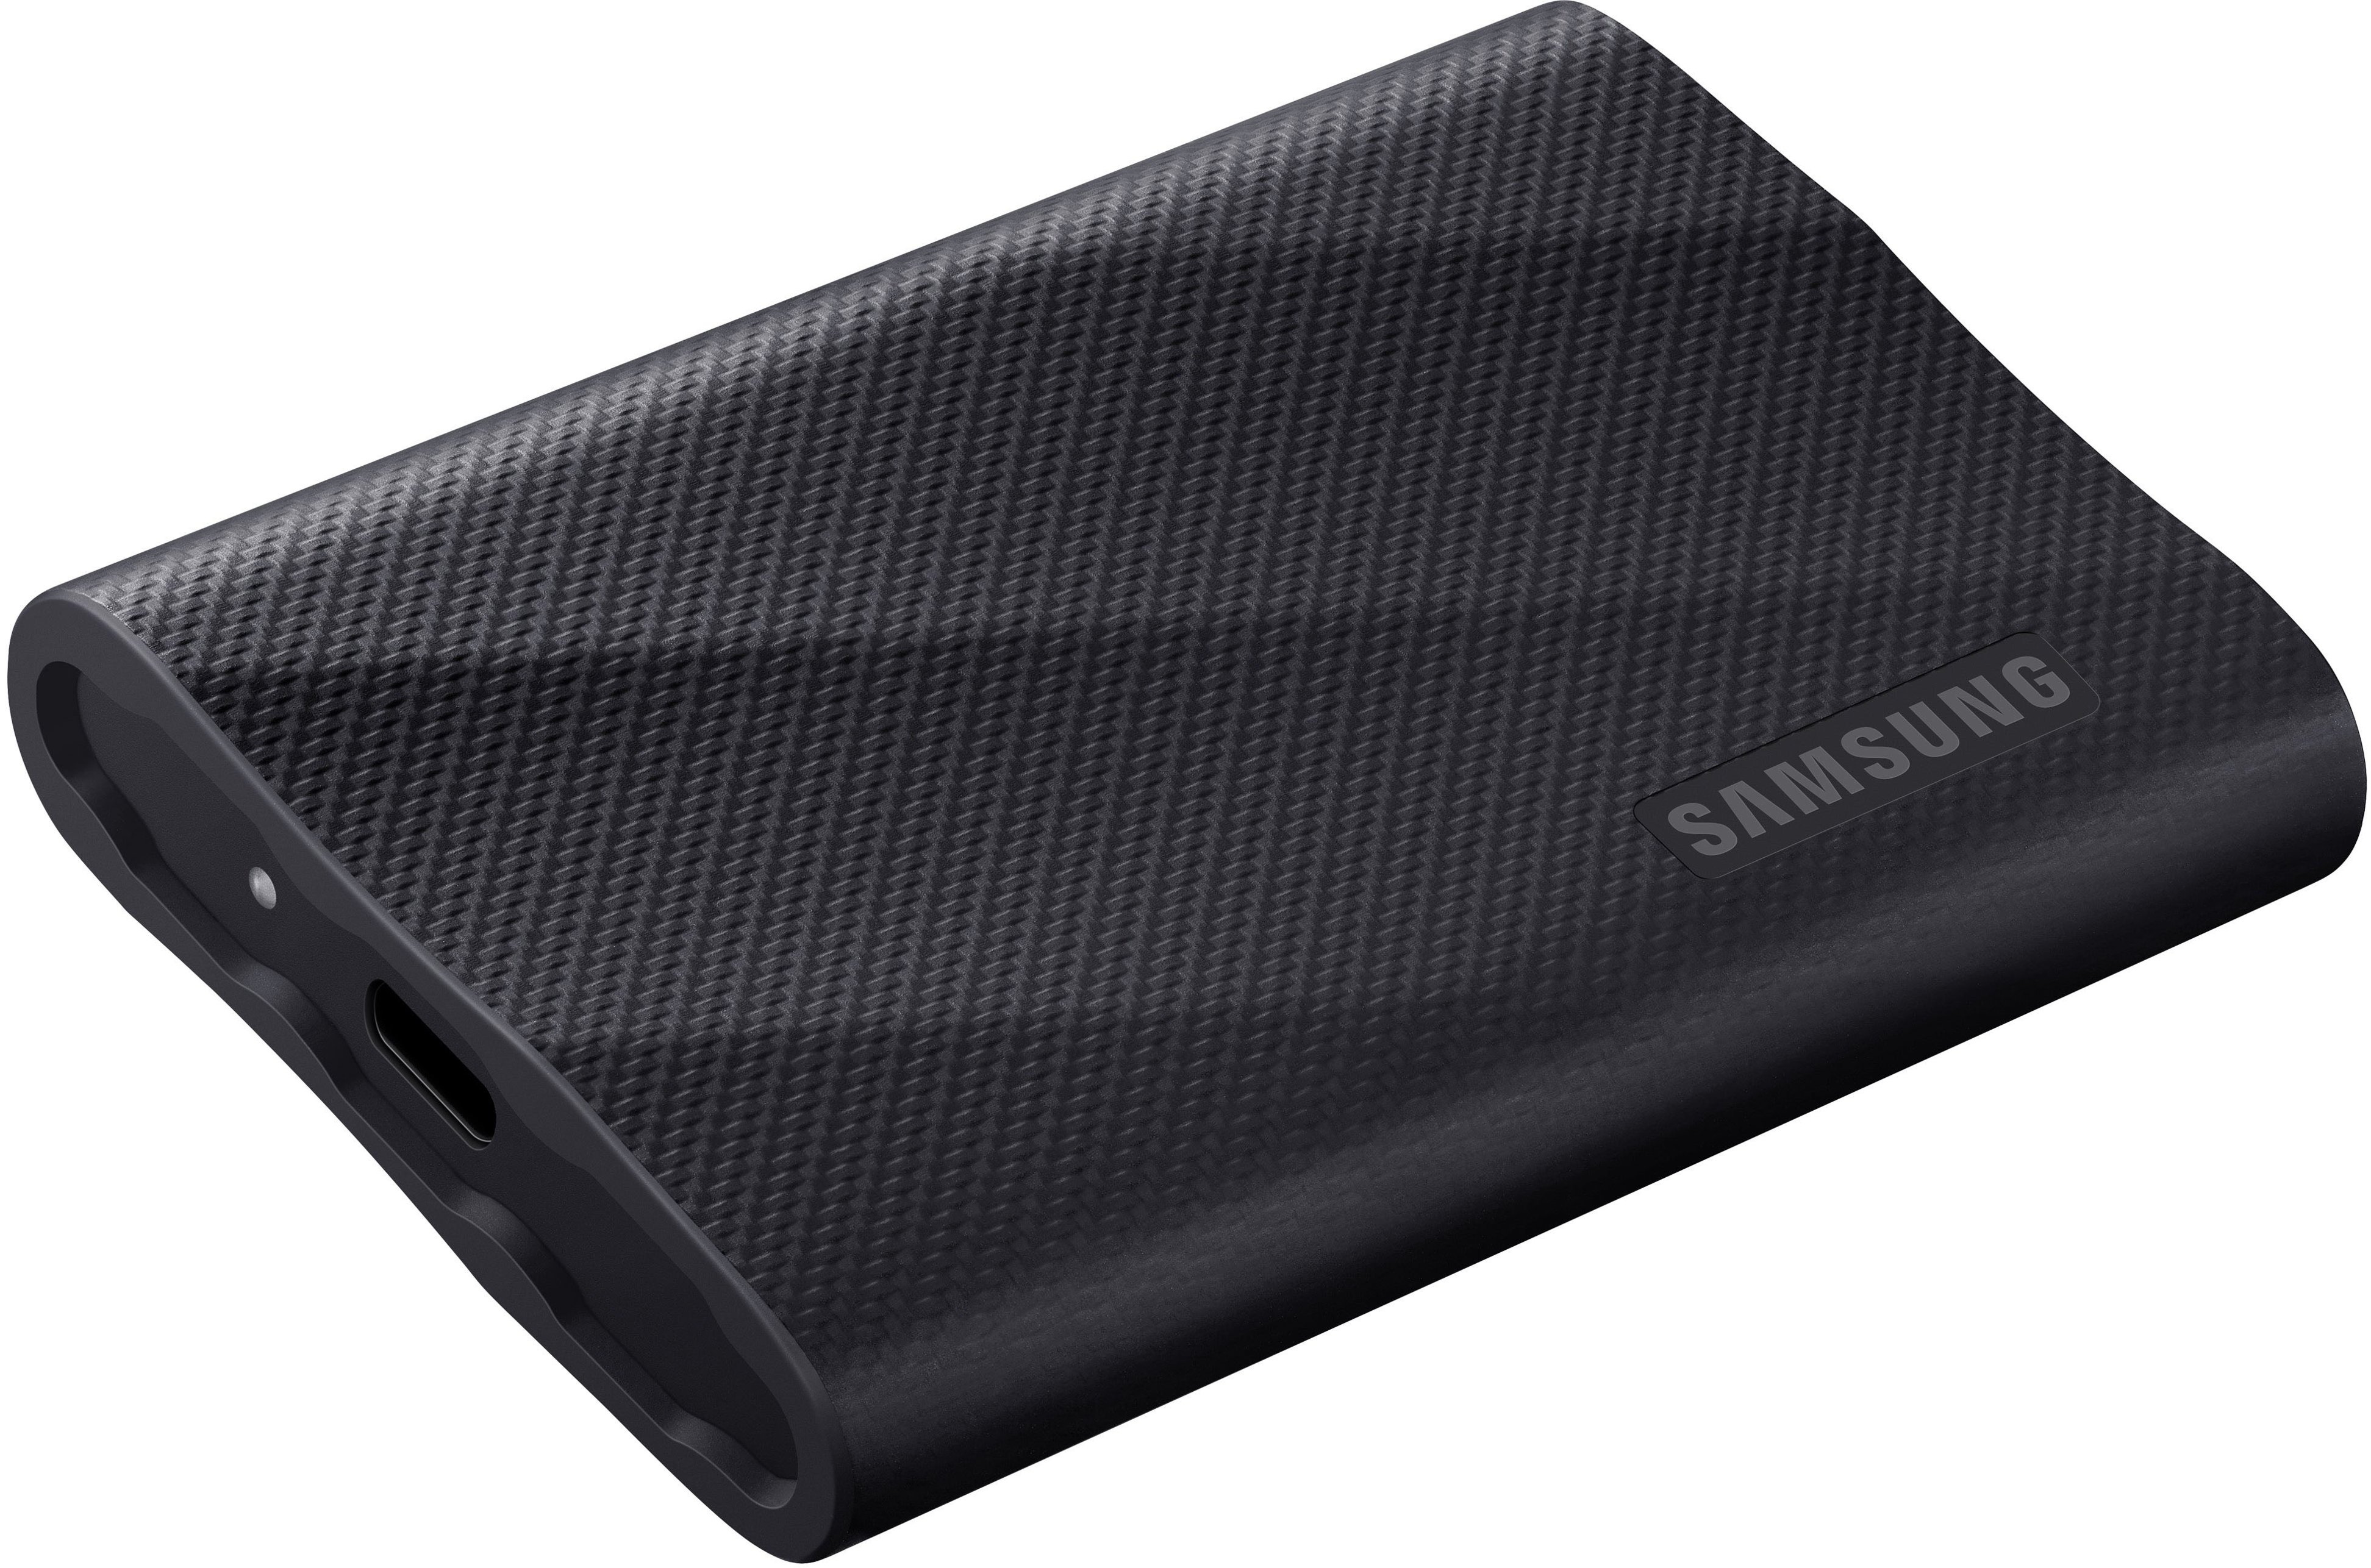 Knocks Up to $100 Off Samsung's New T9 Portable SSDs - CNET